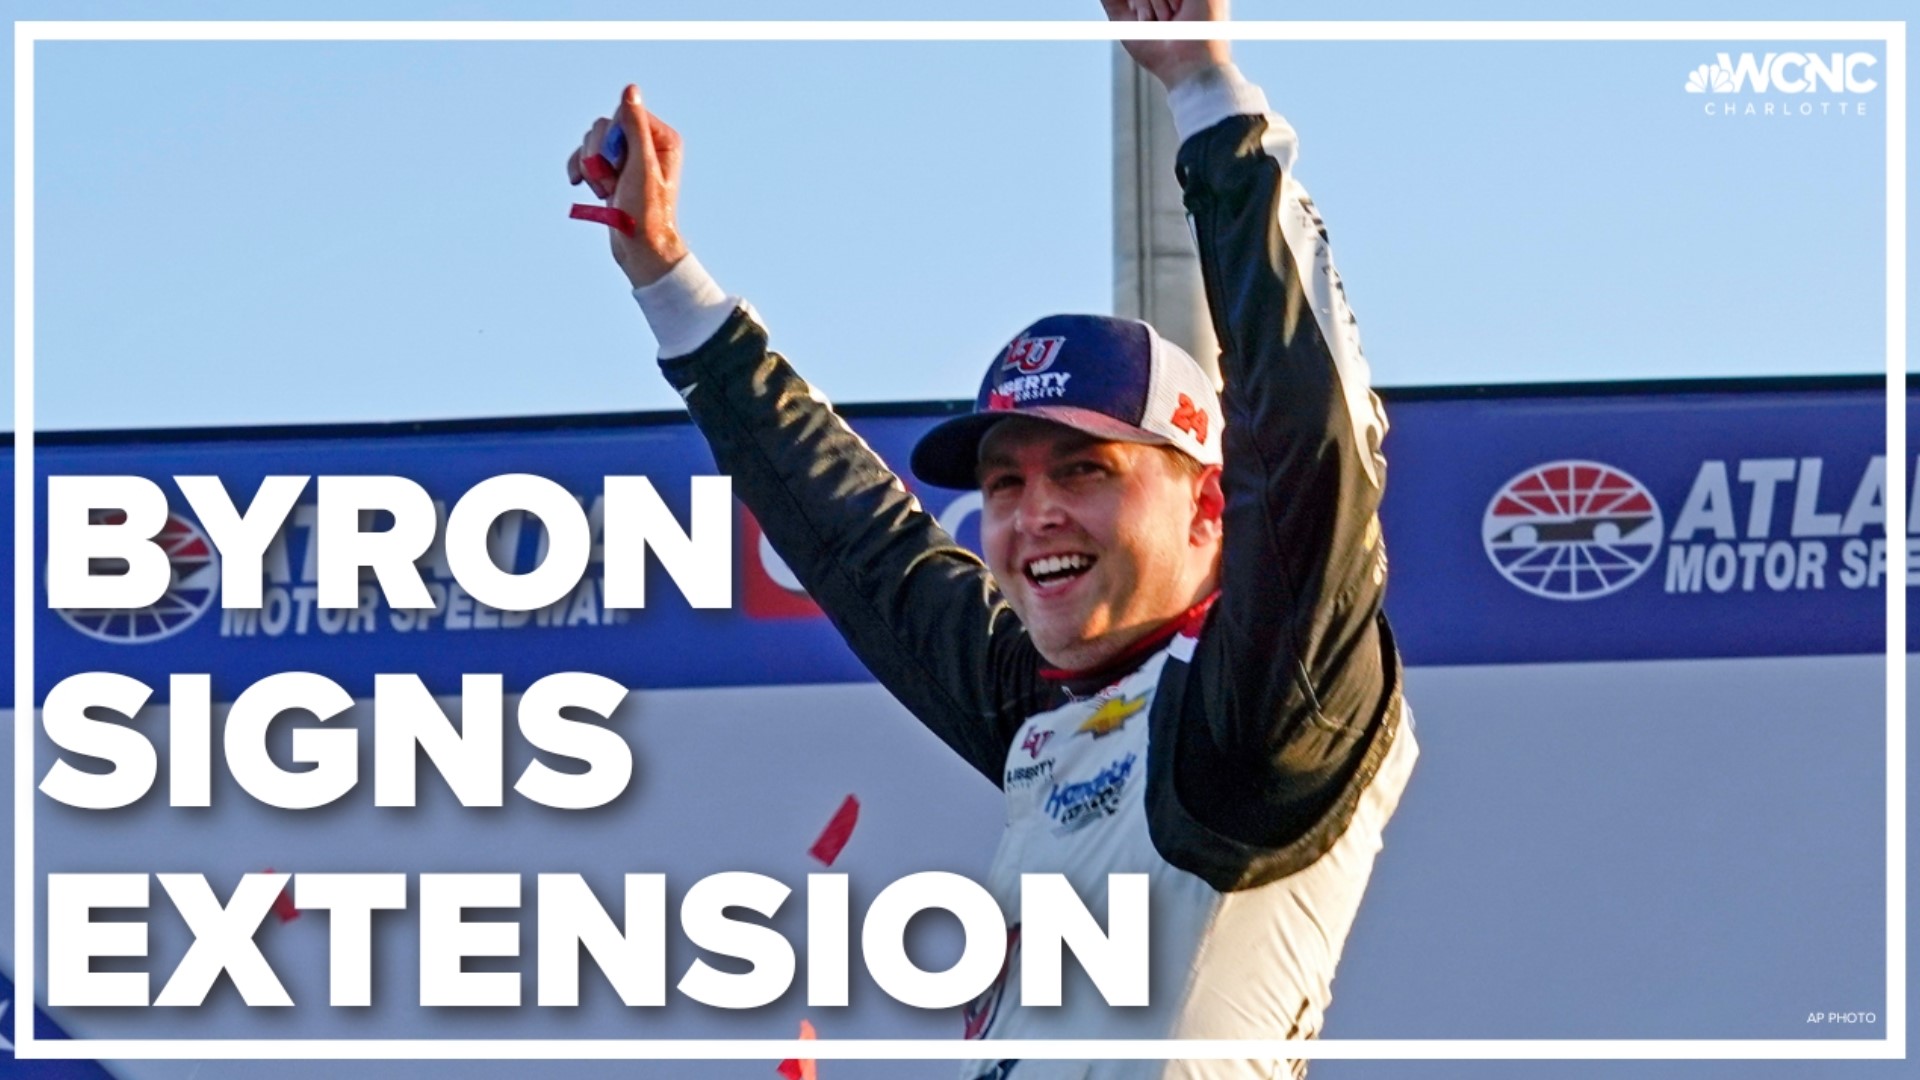 William Byron has reached a three-year contract extension with Hendrick Motorsports that will keep him in the No. 24 Chevrolet through the 2025 season.